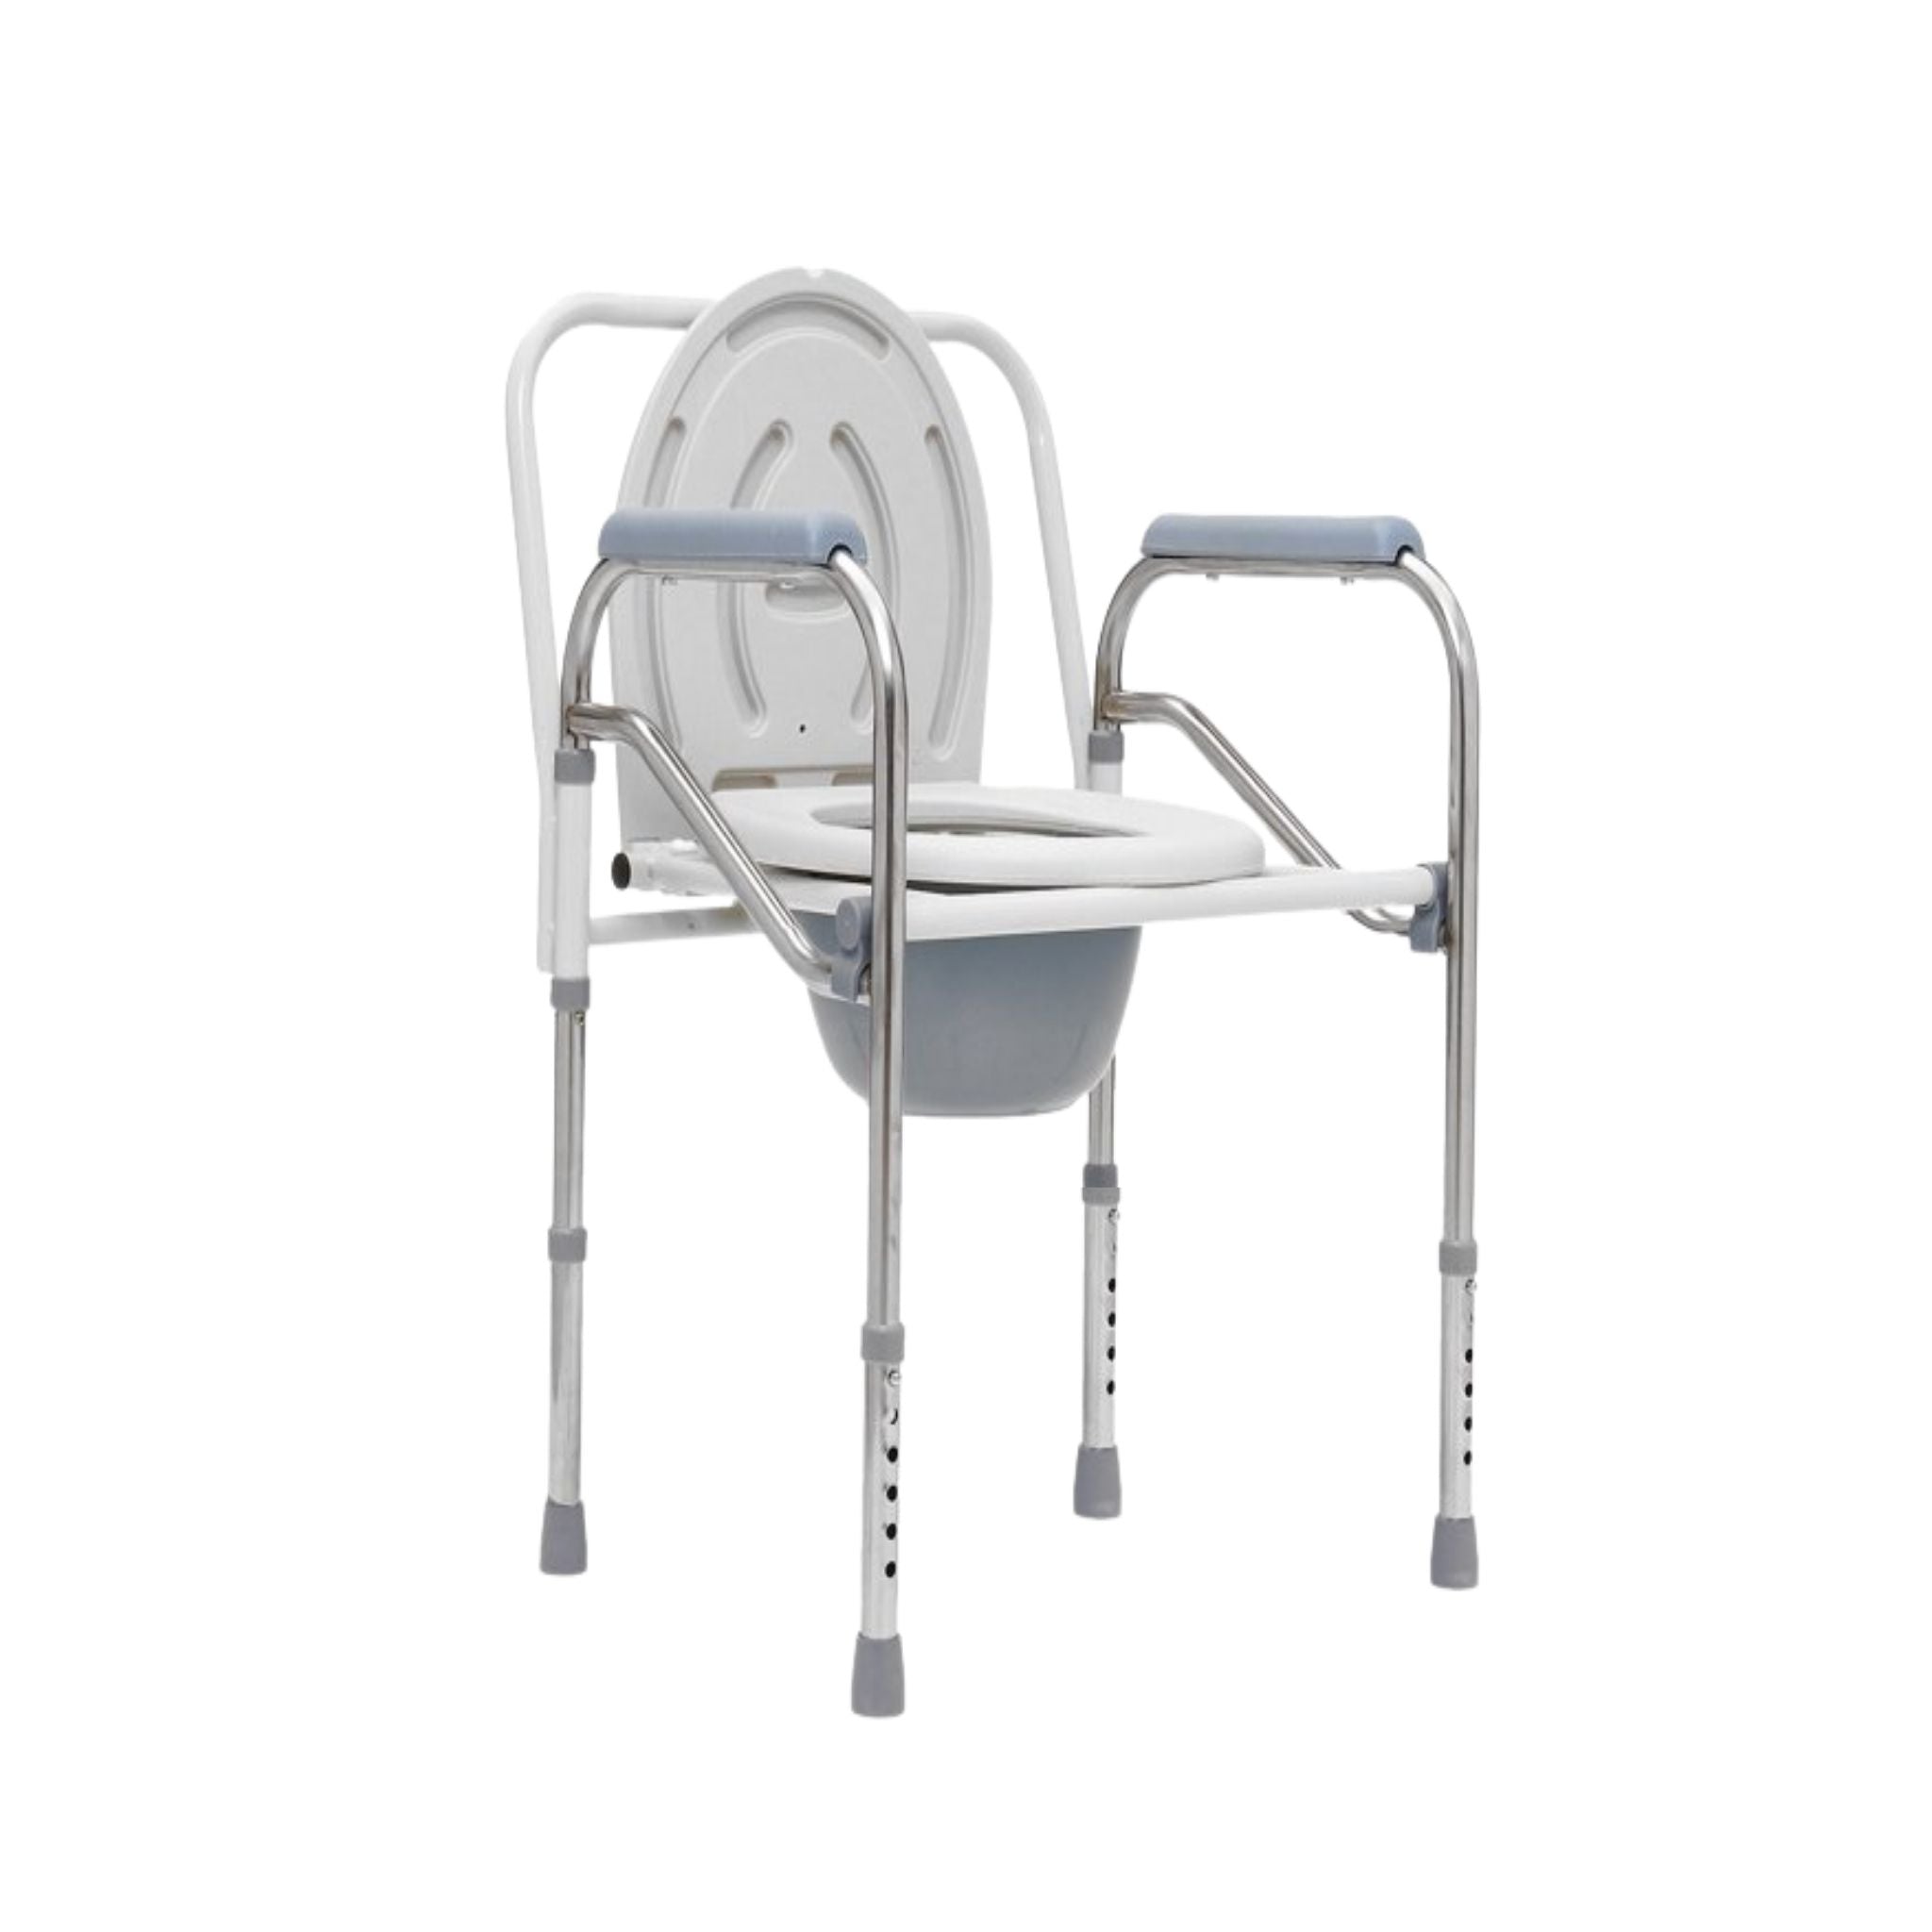 Foldable Commode Chair with Toilet Pot